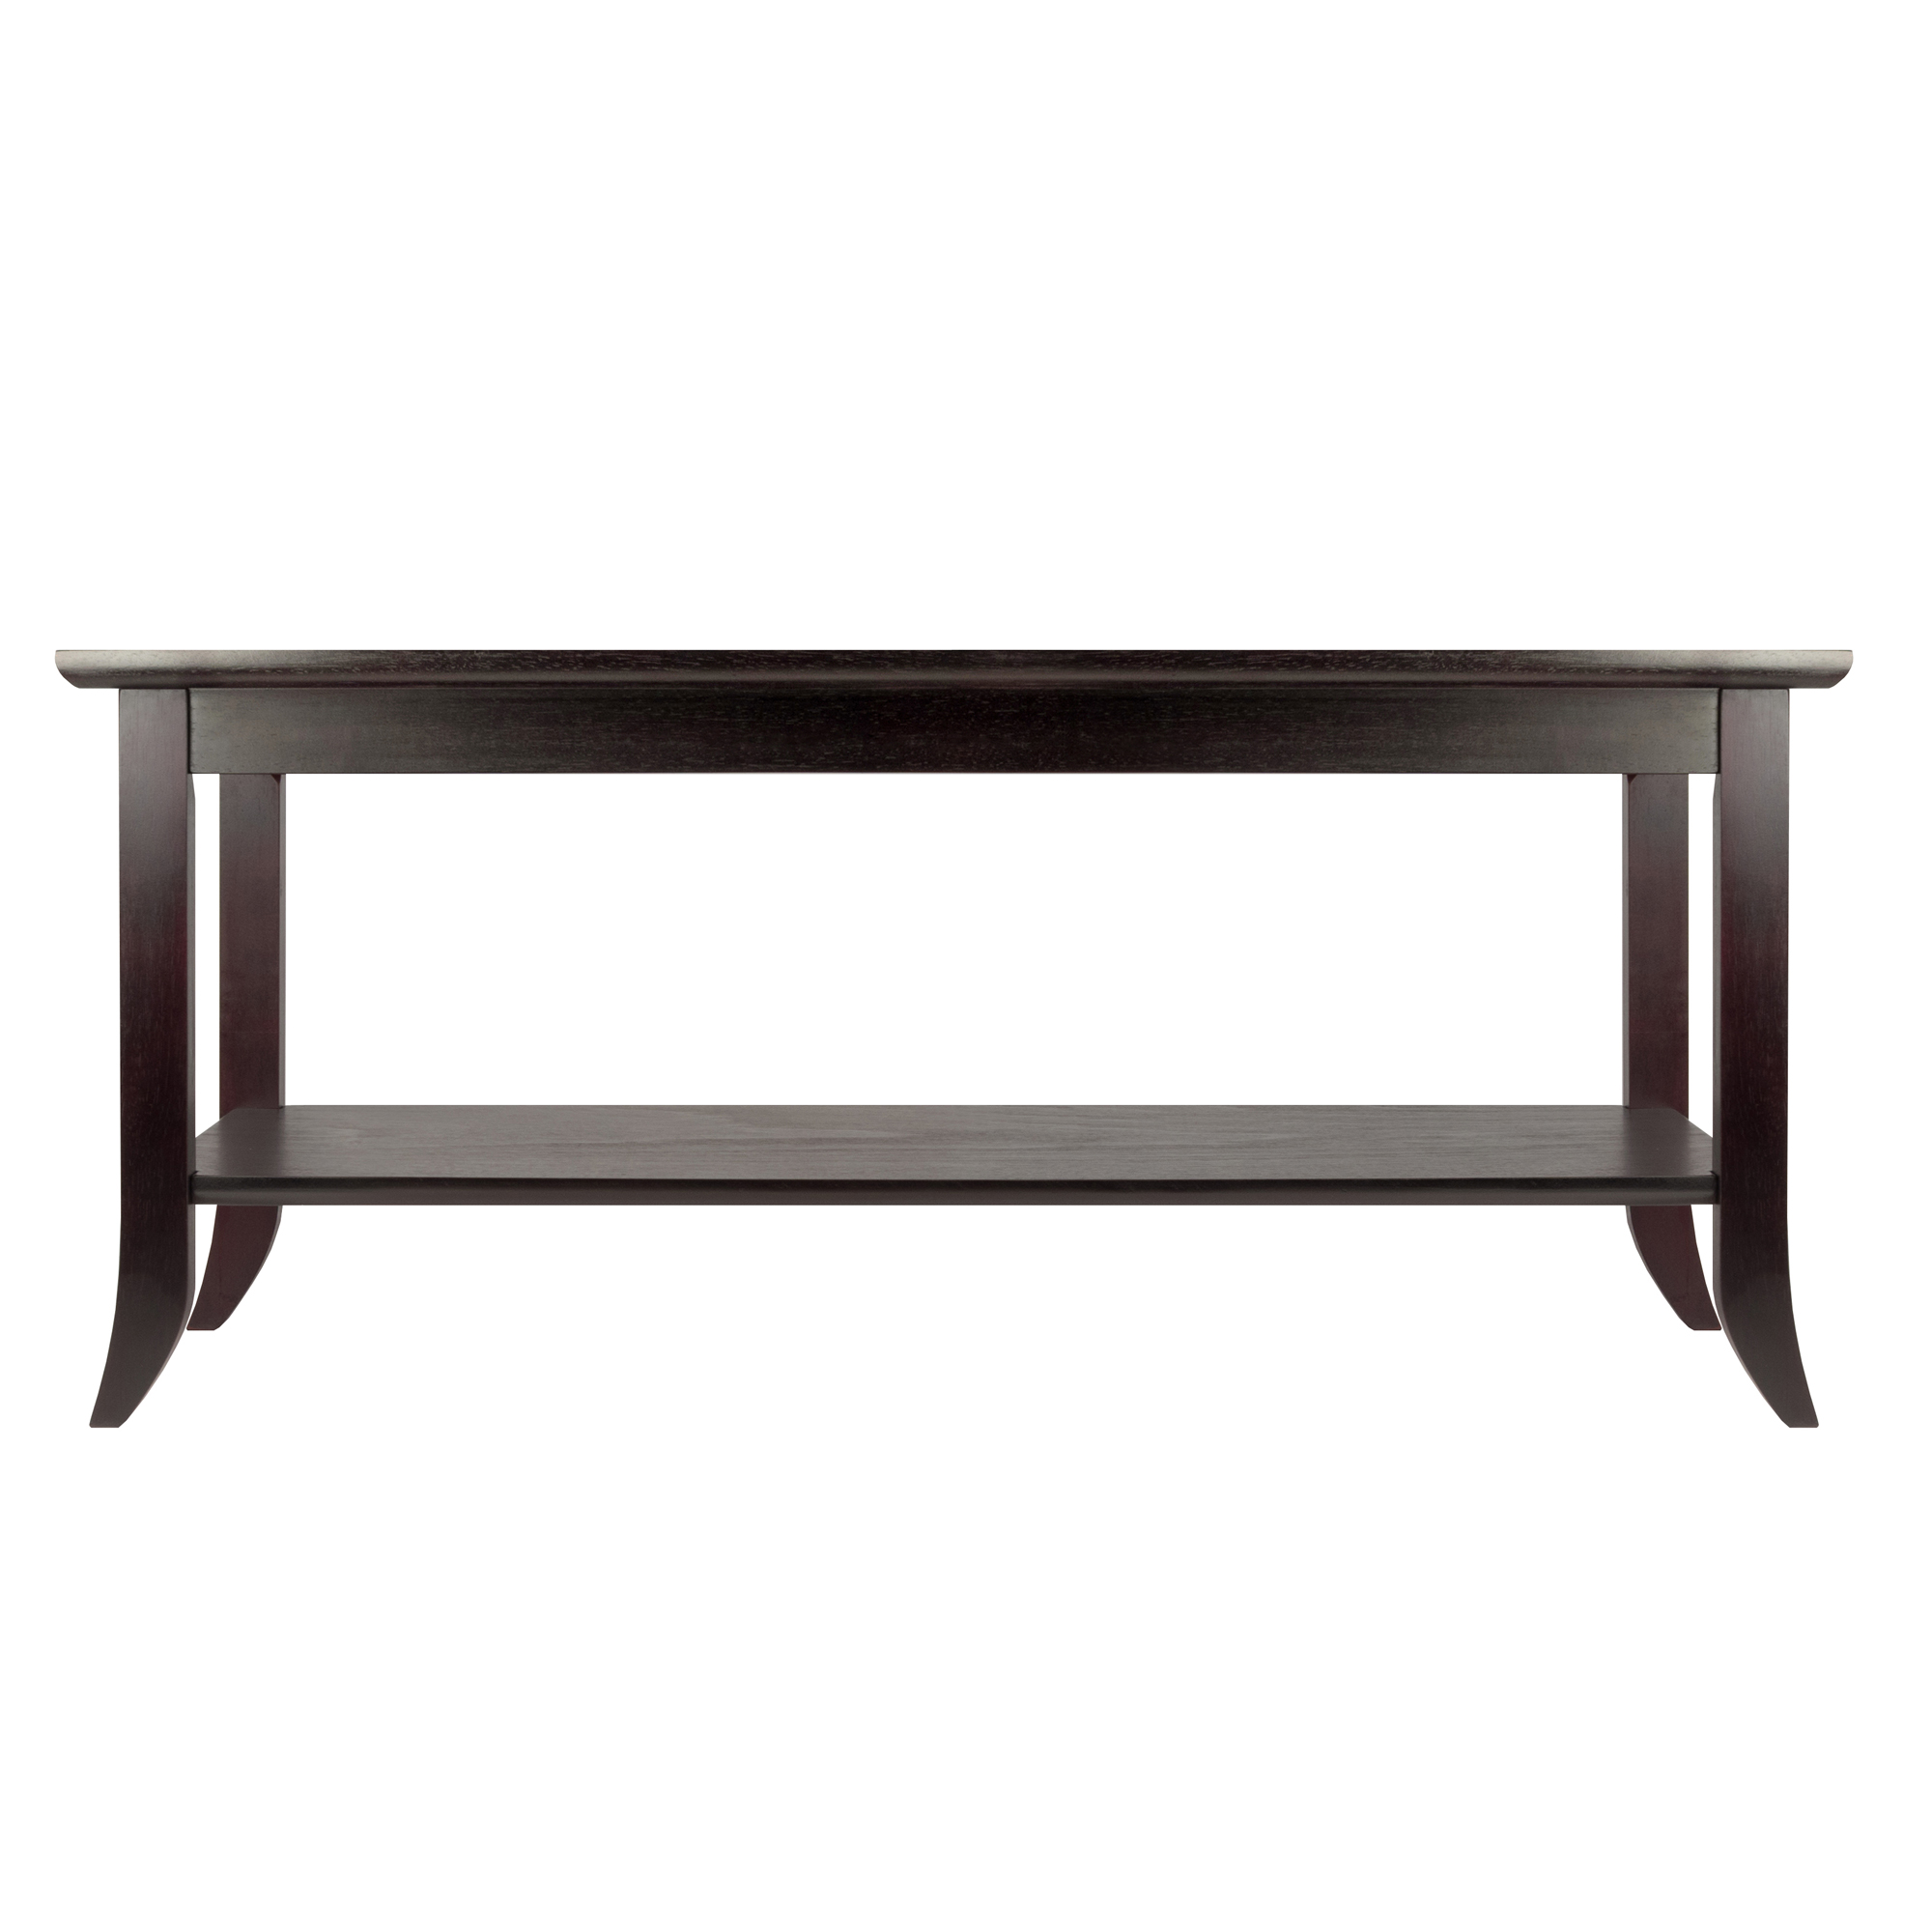 Winsome Wood Genoa Coffee Glass Top Table, Espresso Finish - image 2 of 5